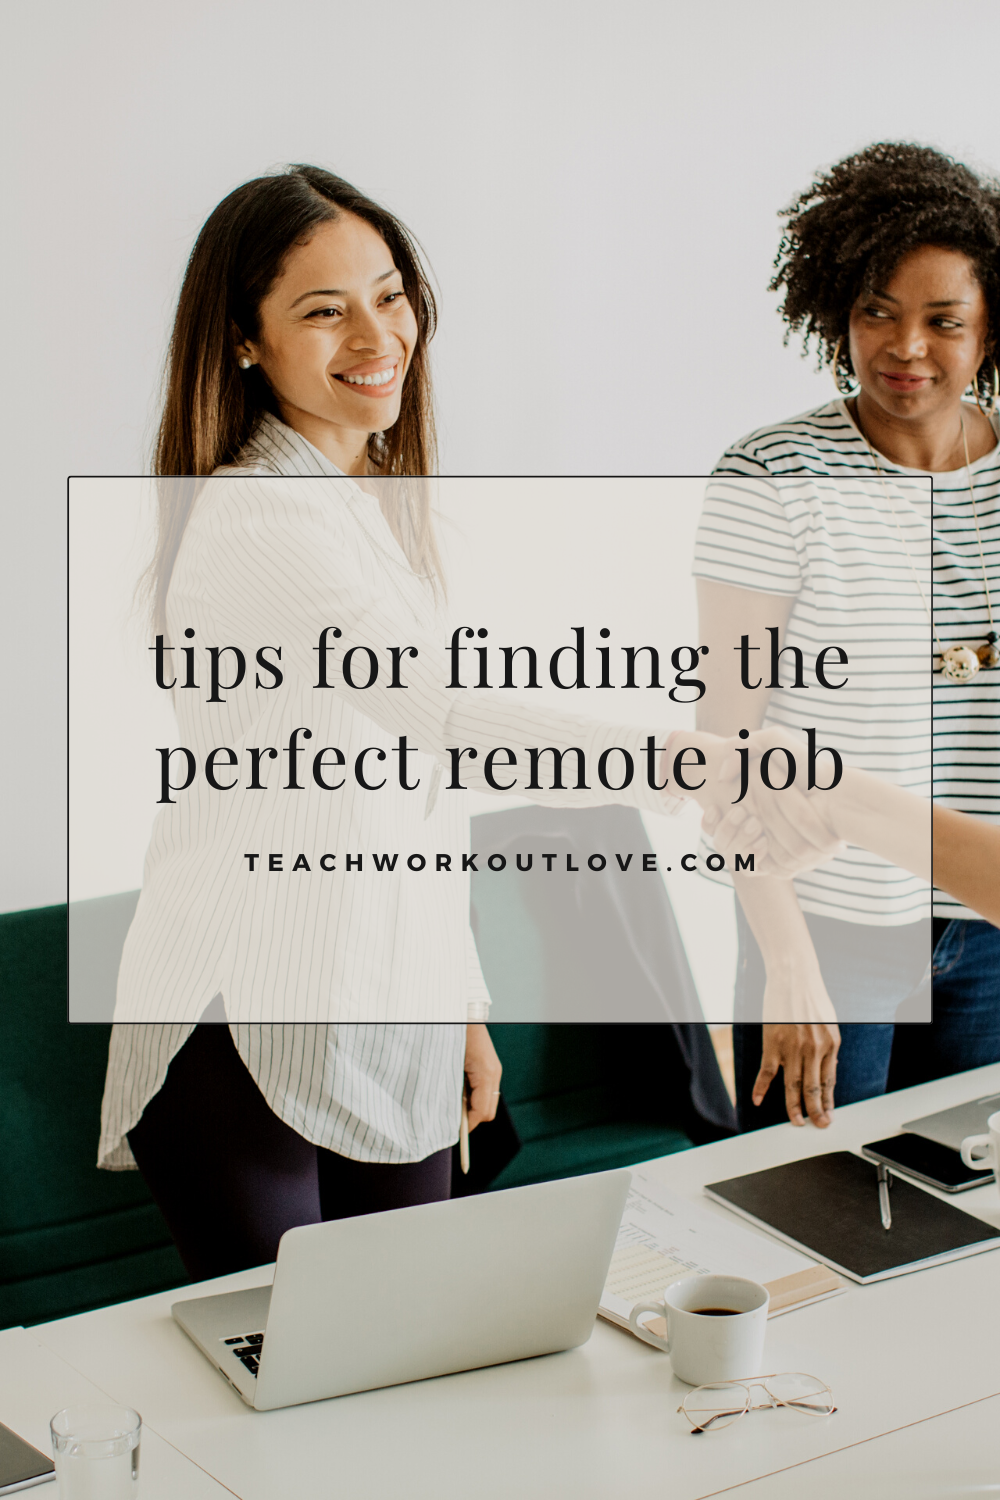 In this article, we answer those questions and more. Read on to find out how to land the perfect remote job in a crowded market.